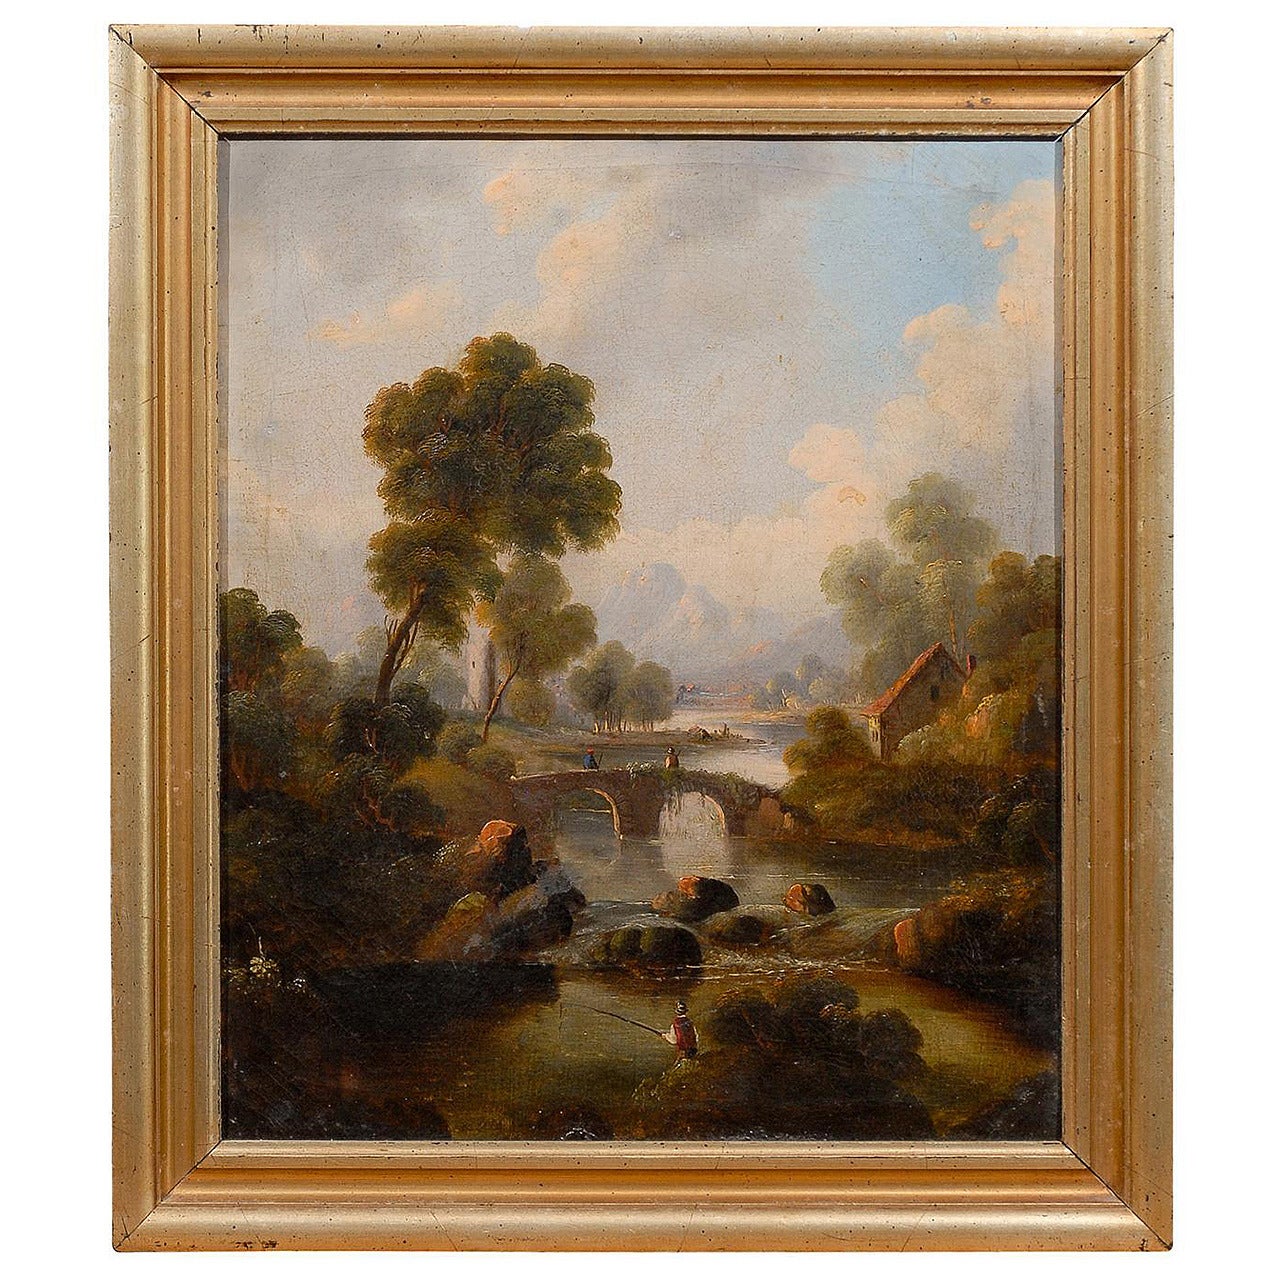 Giltwood Framed Oil on Canvas Landscape Painting, 19th Century